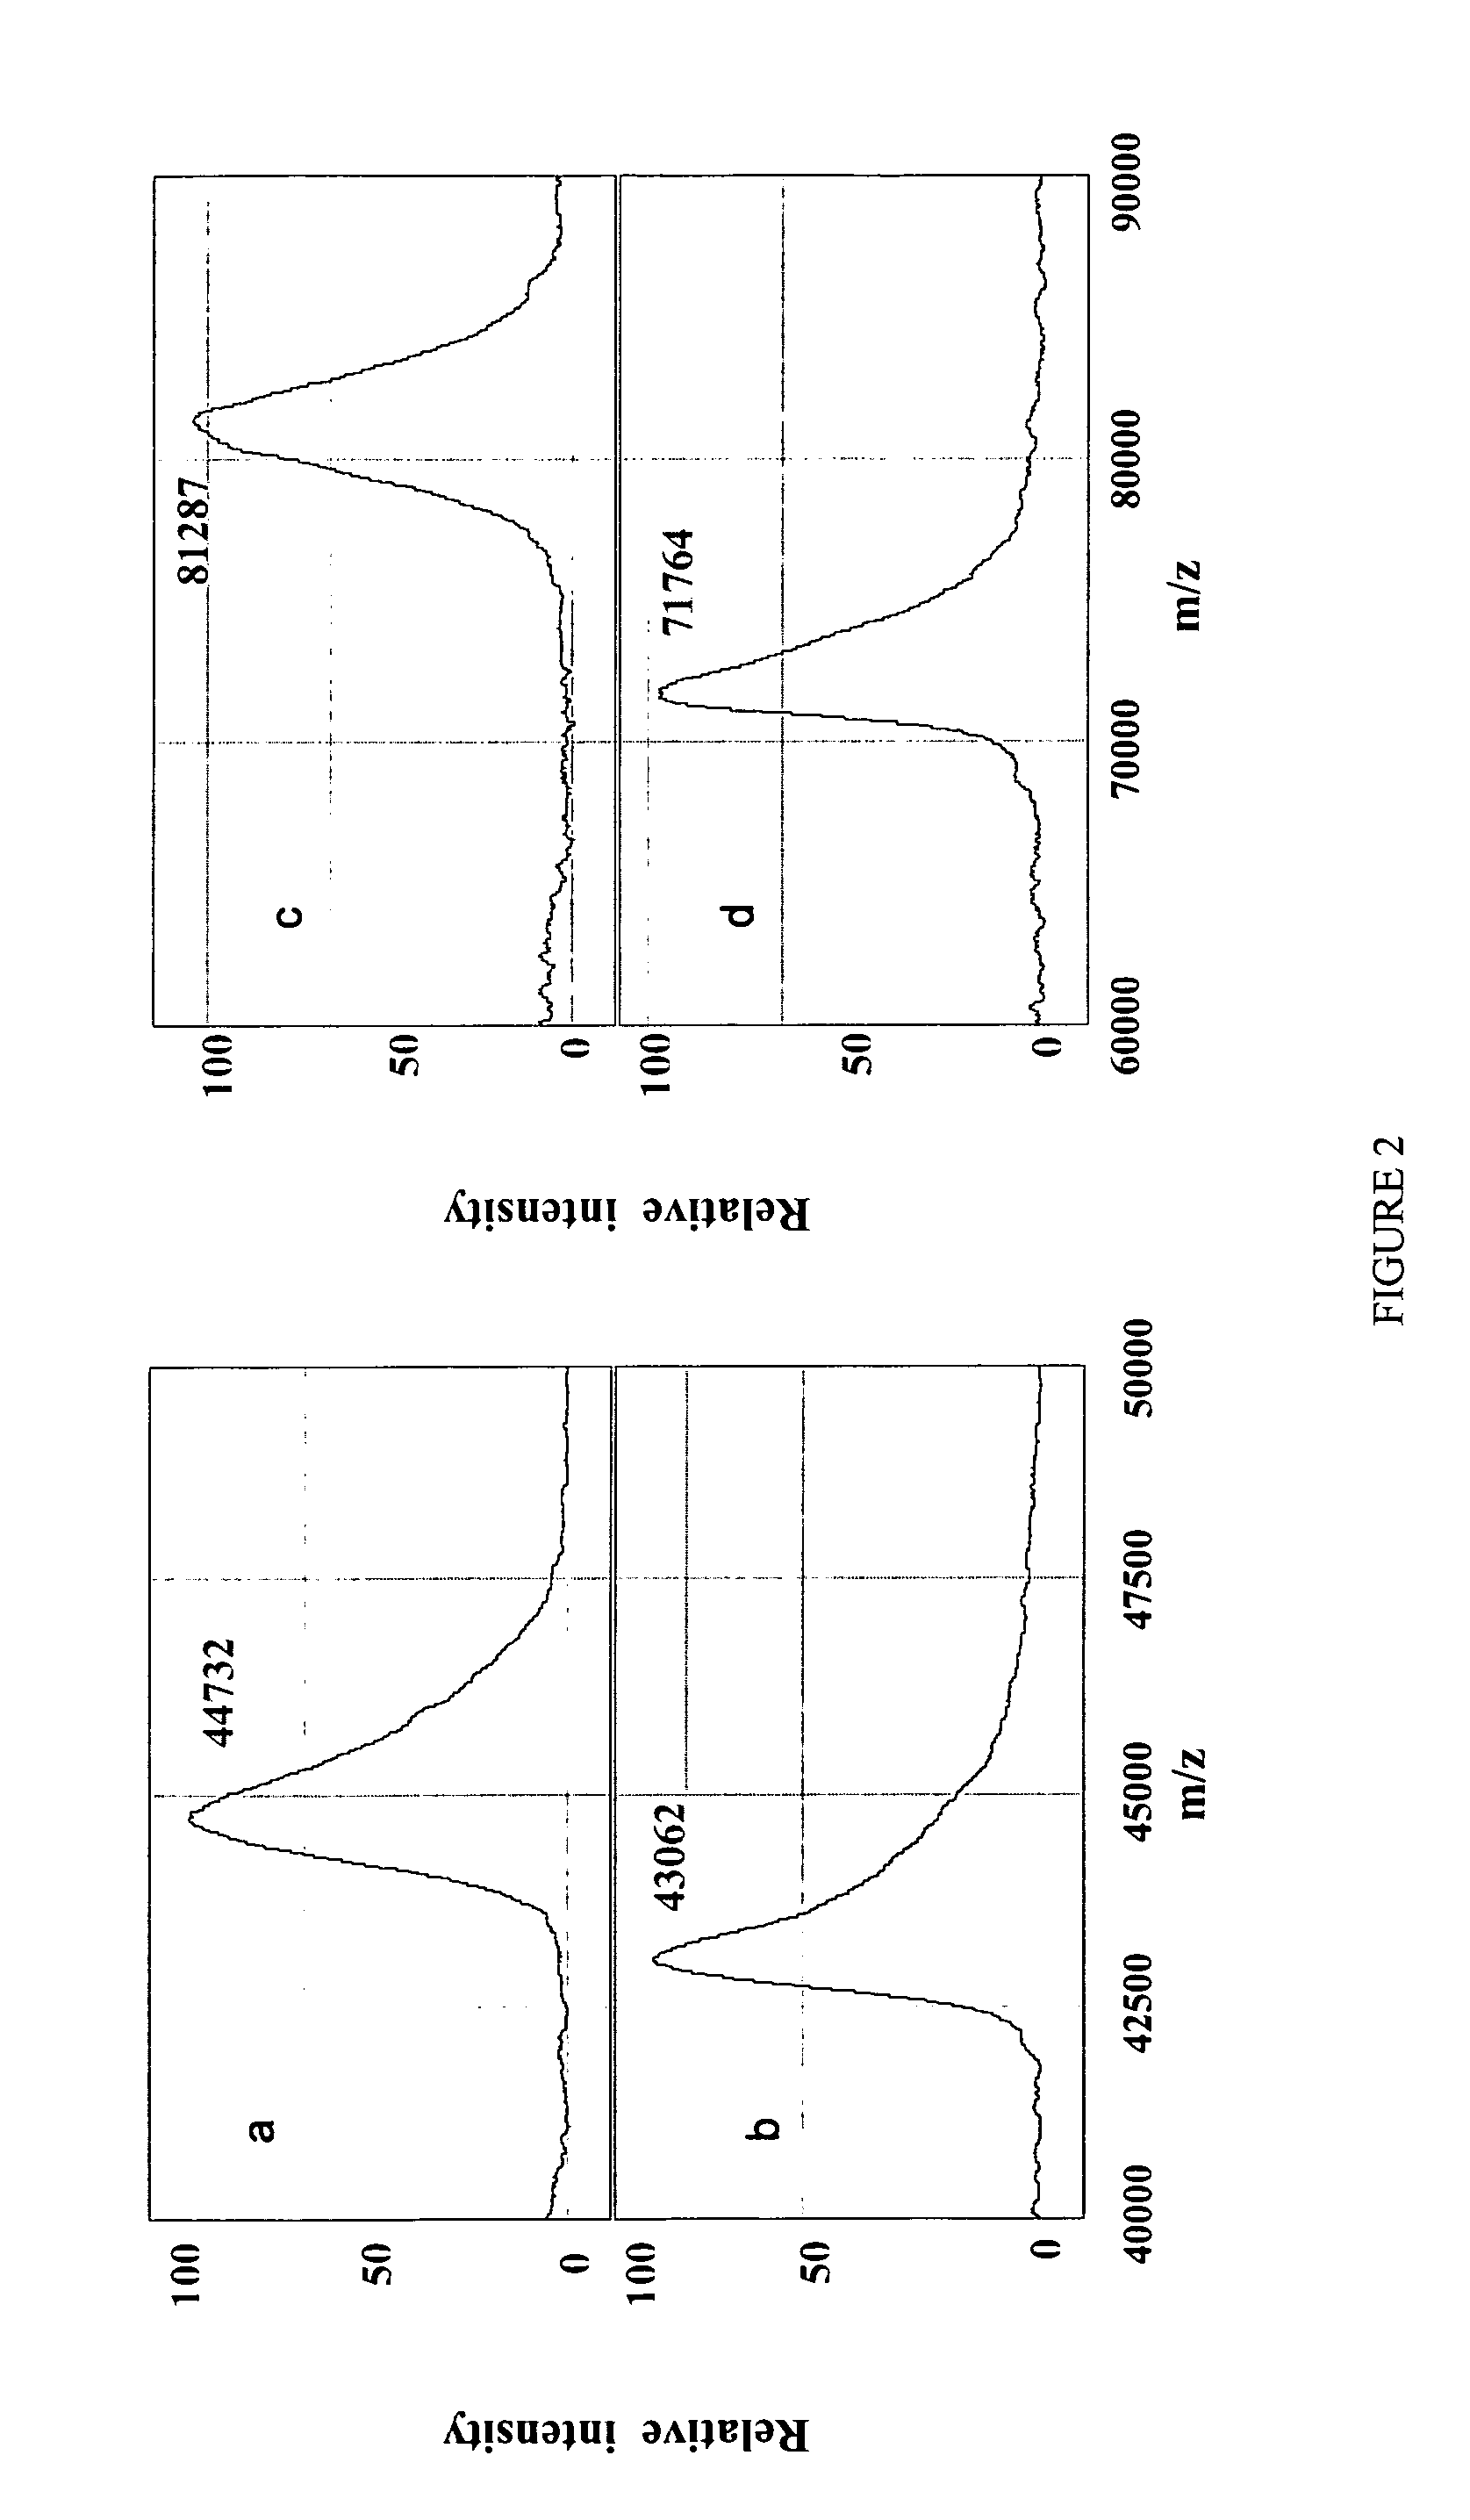 Method for chemical and enzymatic treatment of posttranslationally modified proteins bound to a protein chip